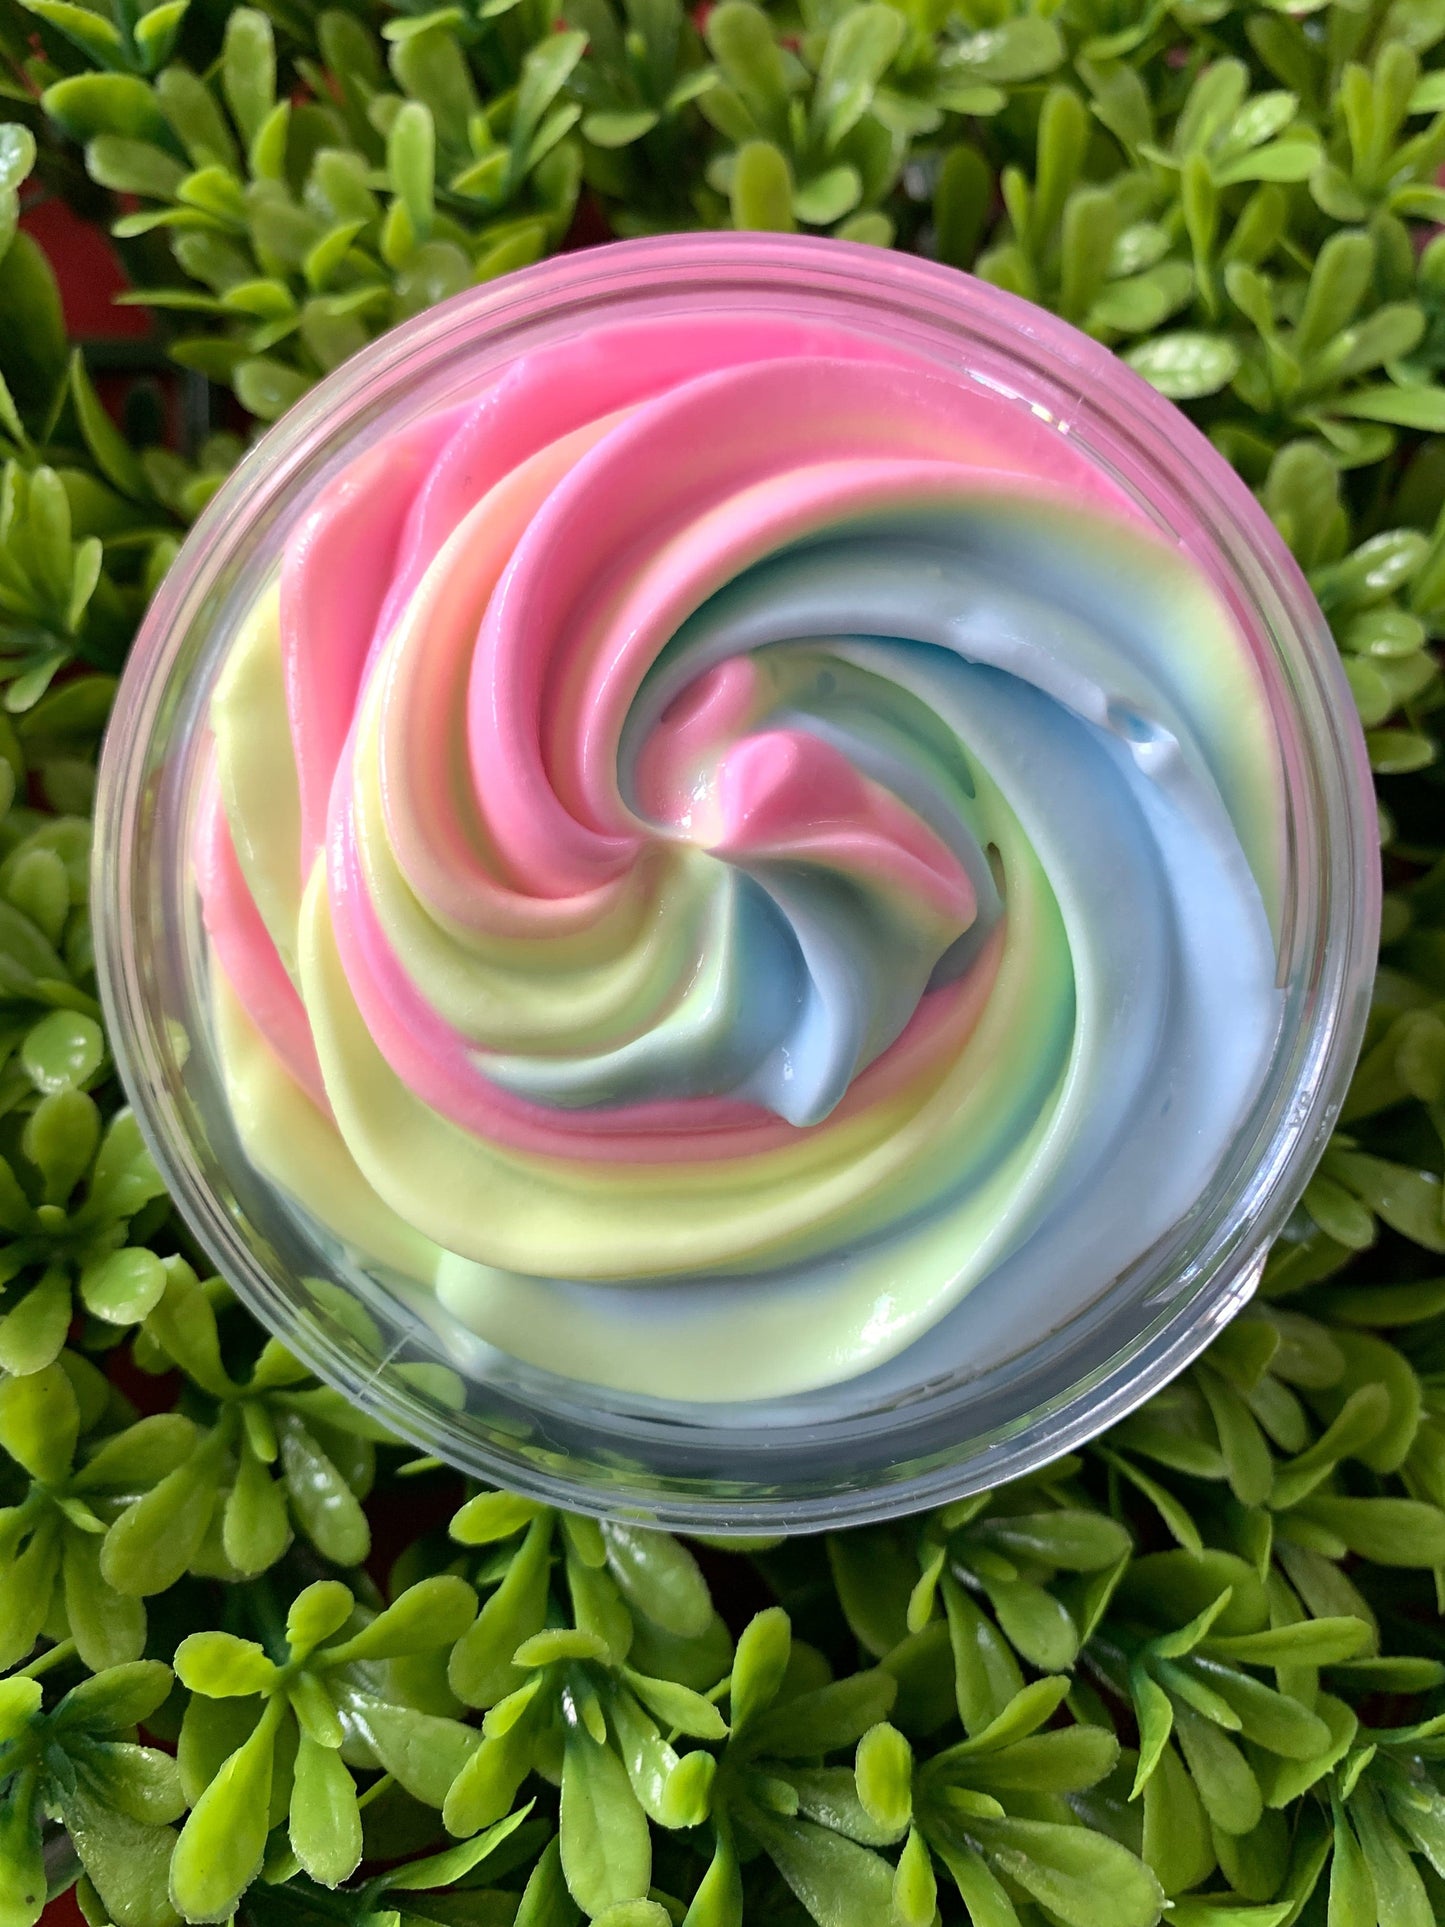 PRIVATE LABEL Rainbow Emulsified Whipped Body Butter 4 oz. listing - Seli Han Skincare 